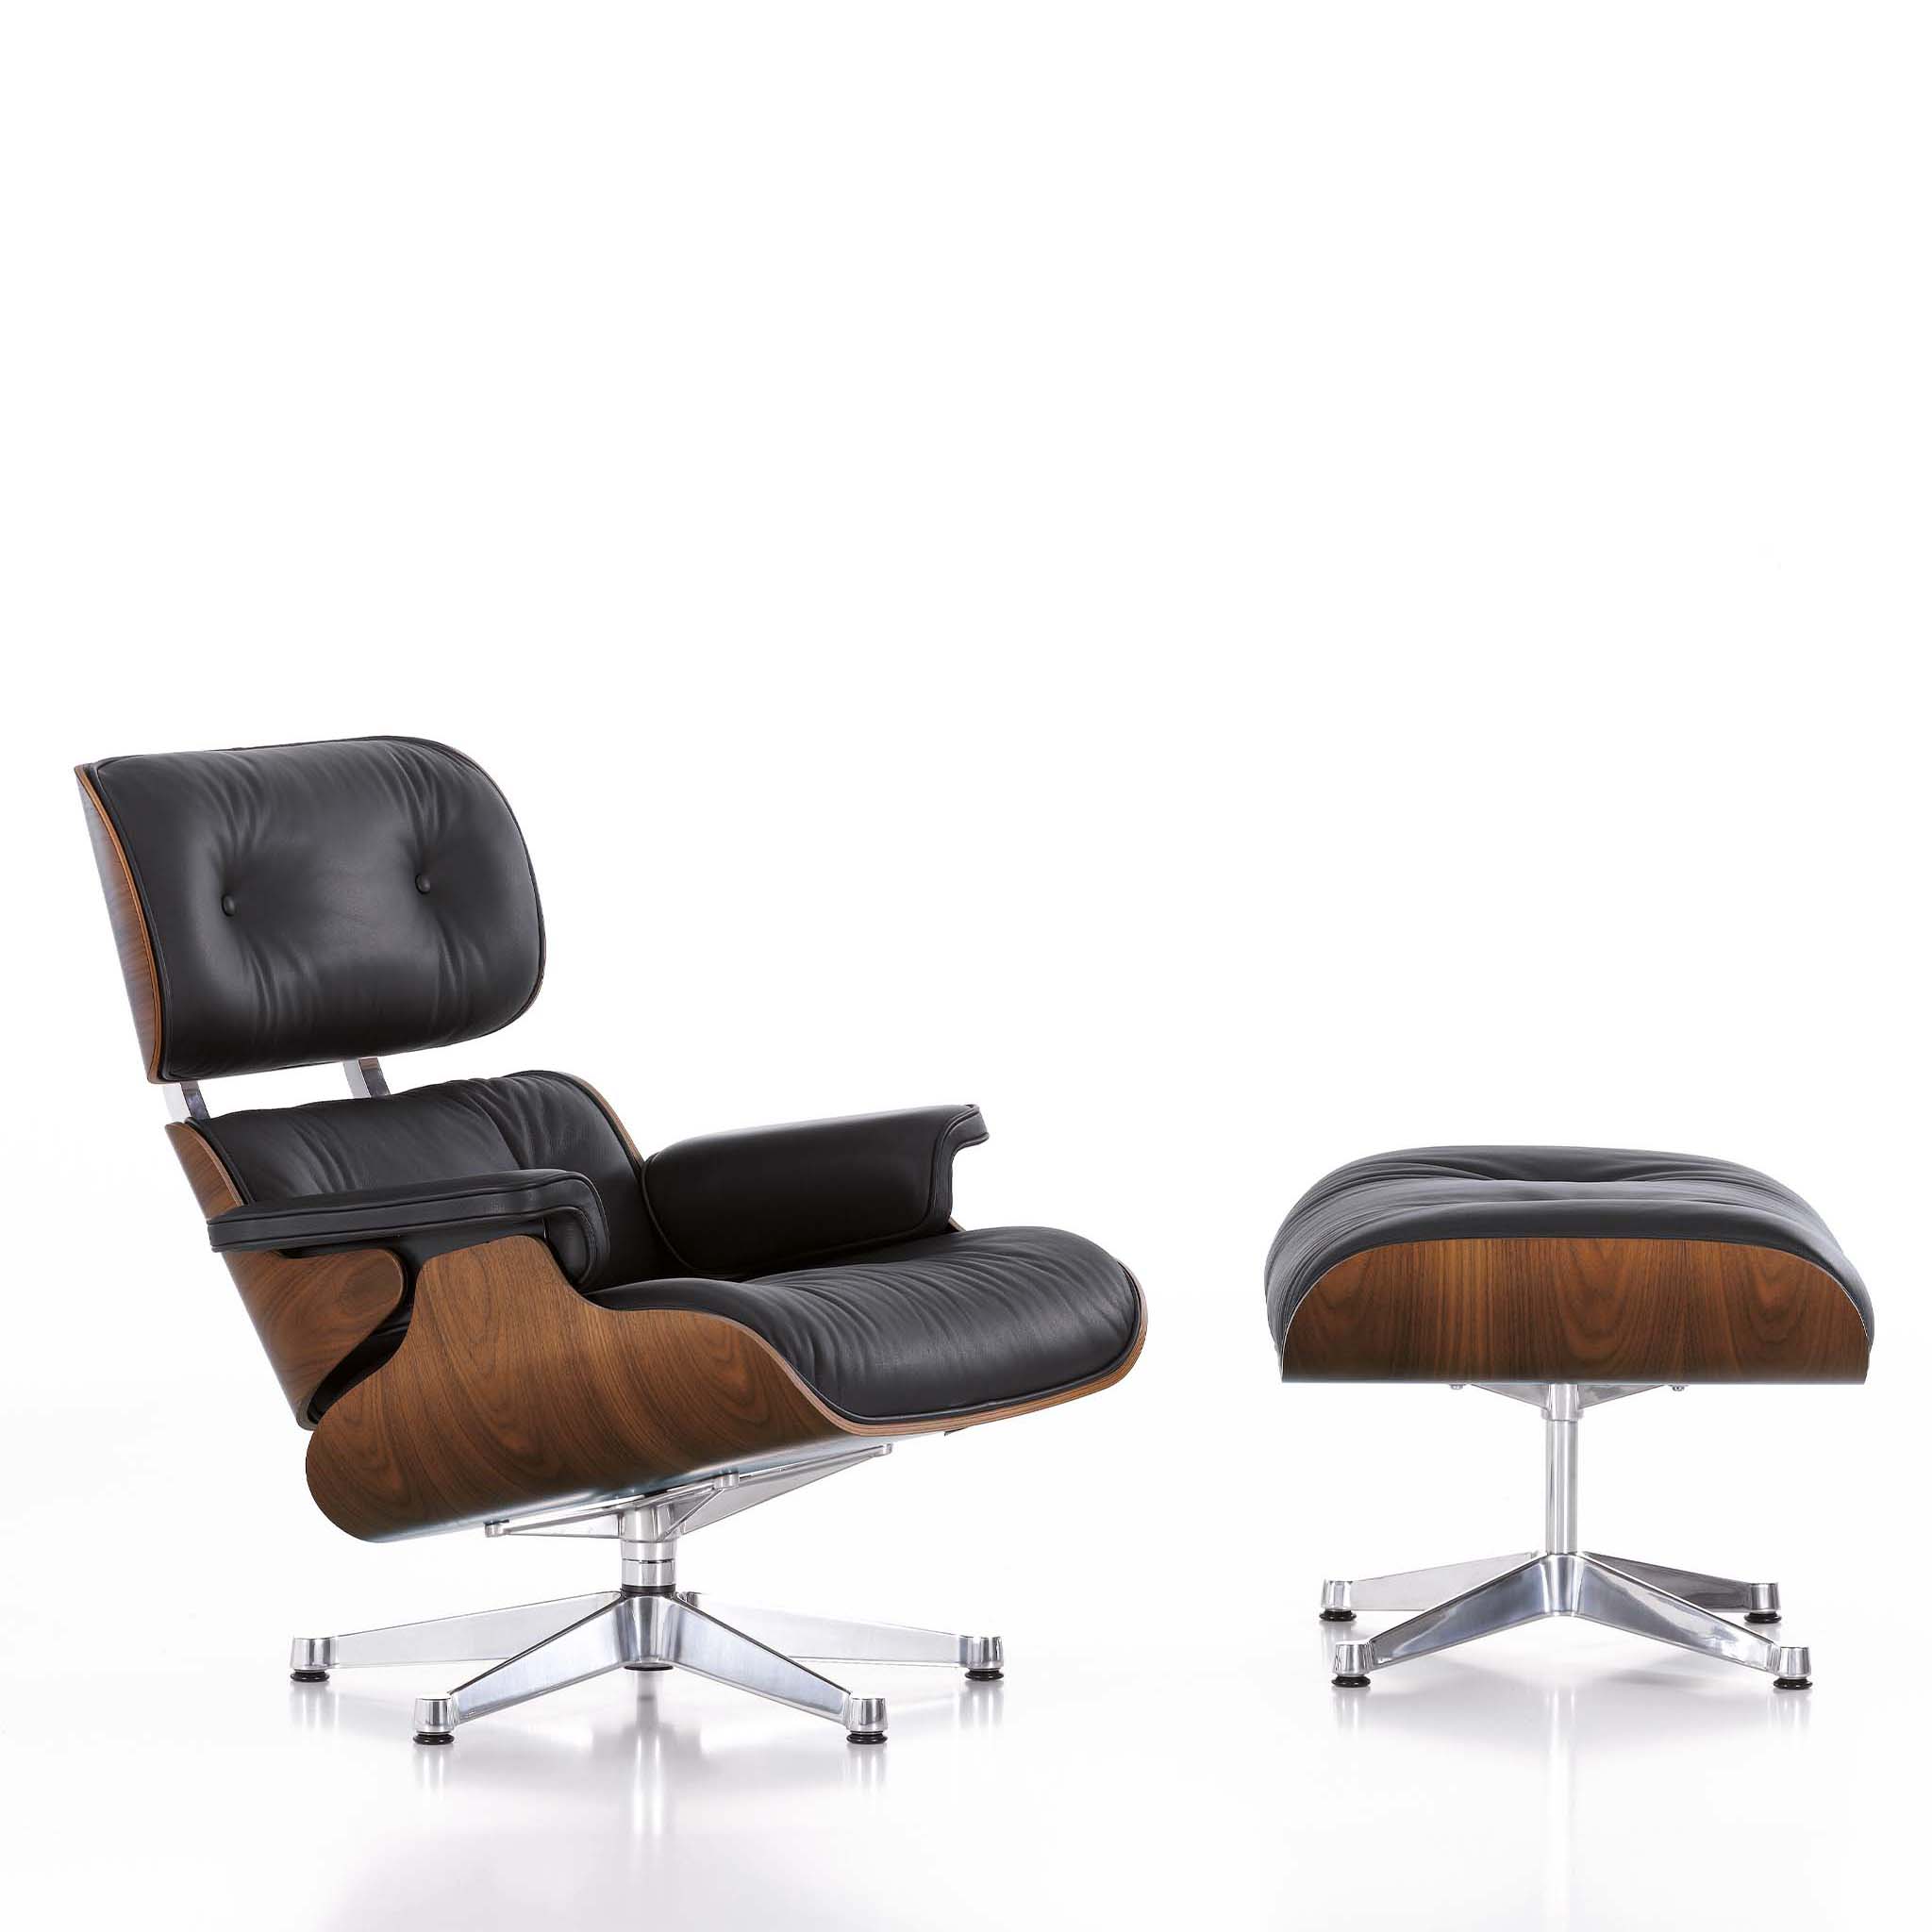 Eames Lounge Chair, Classic Dimensions by Vitra